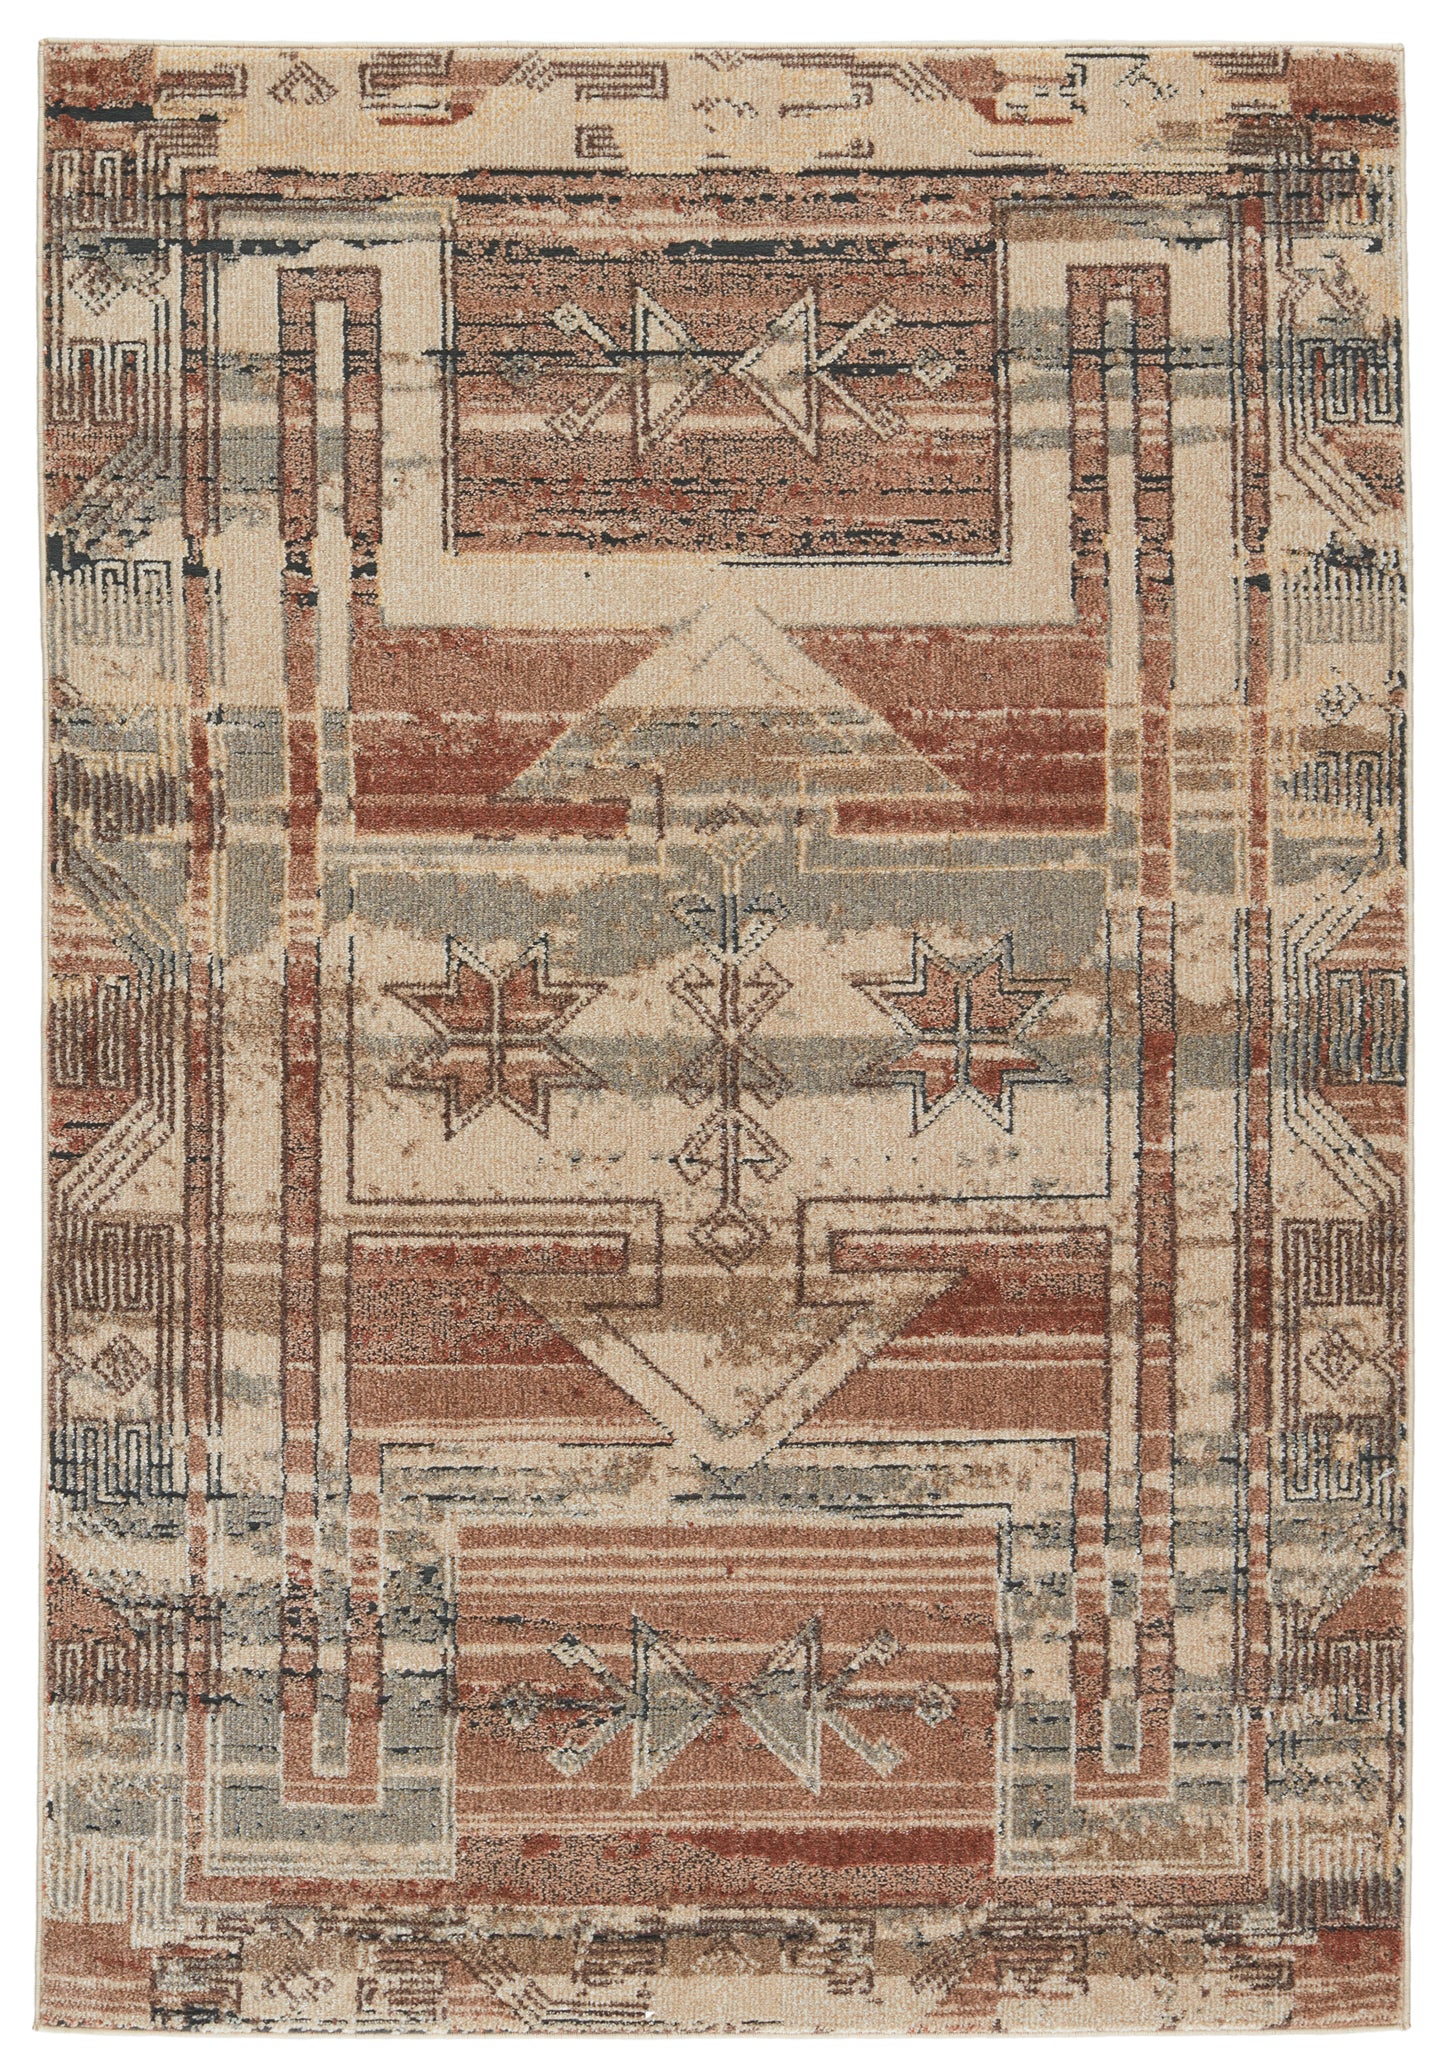 Revelry Calli Handmade Synthetic Blend Outdoor Area Rug From Jaipur Living